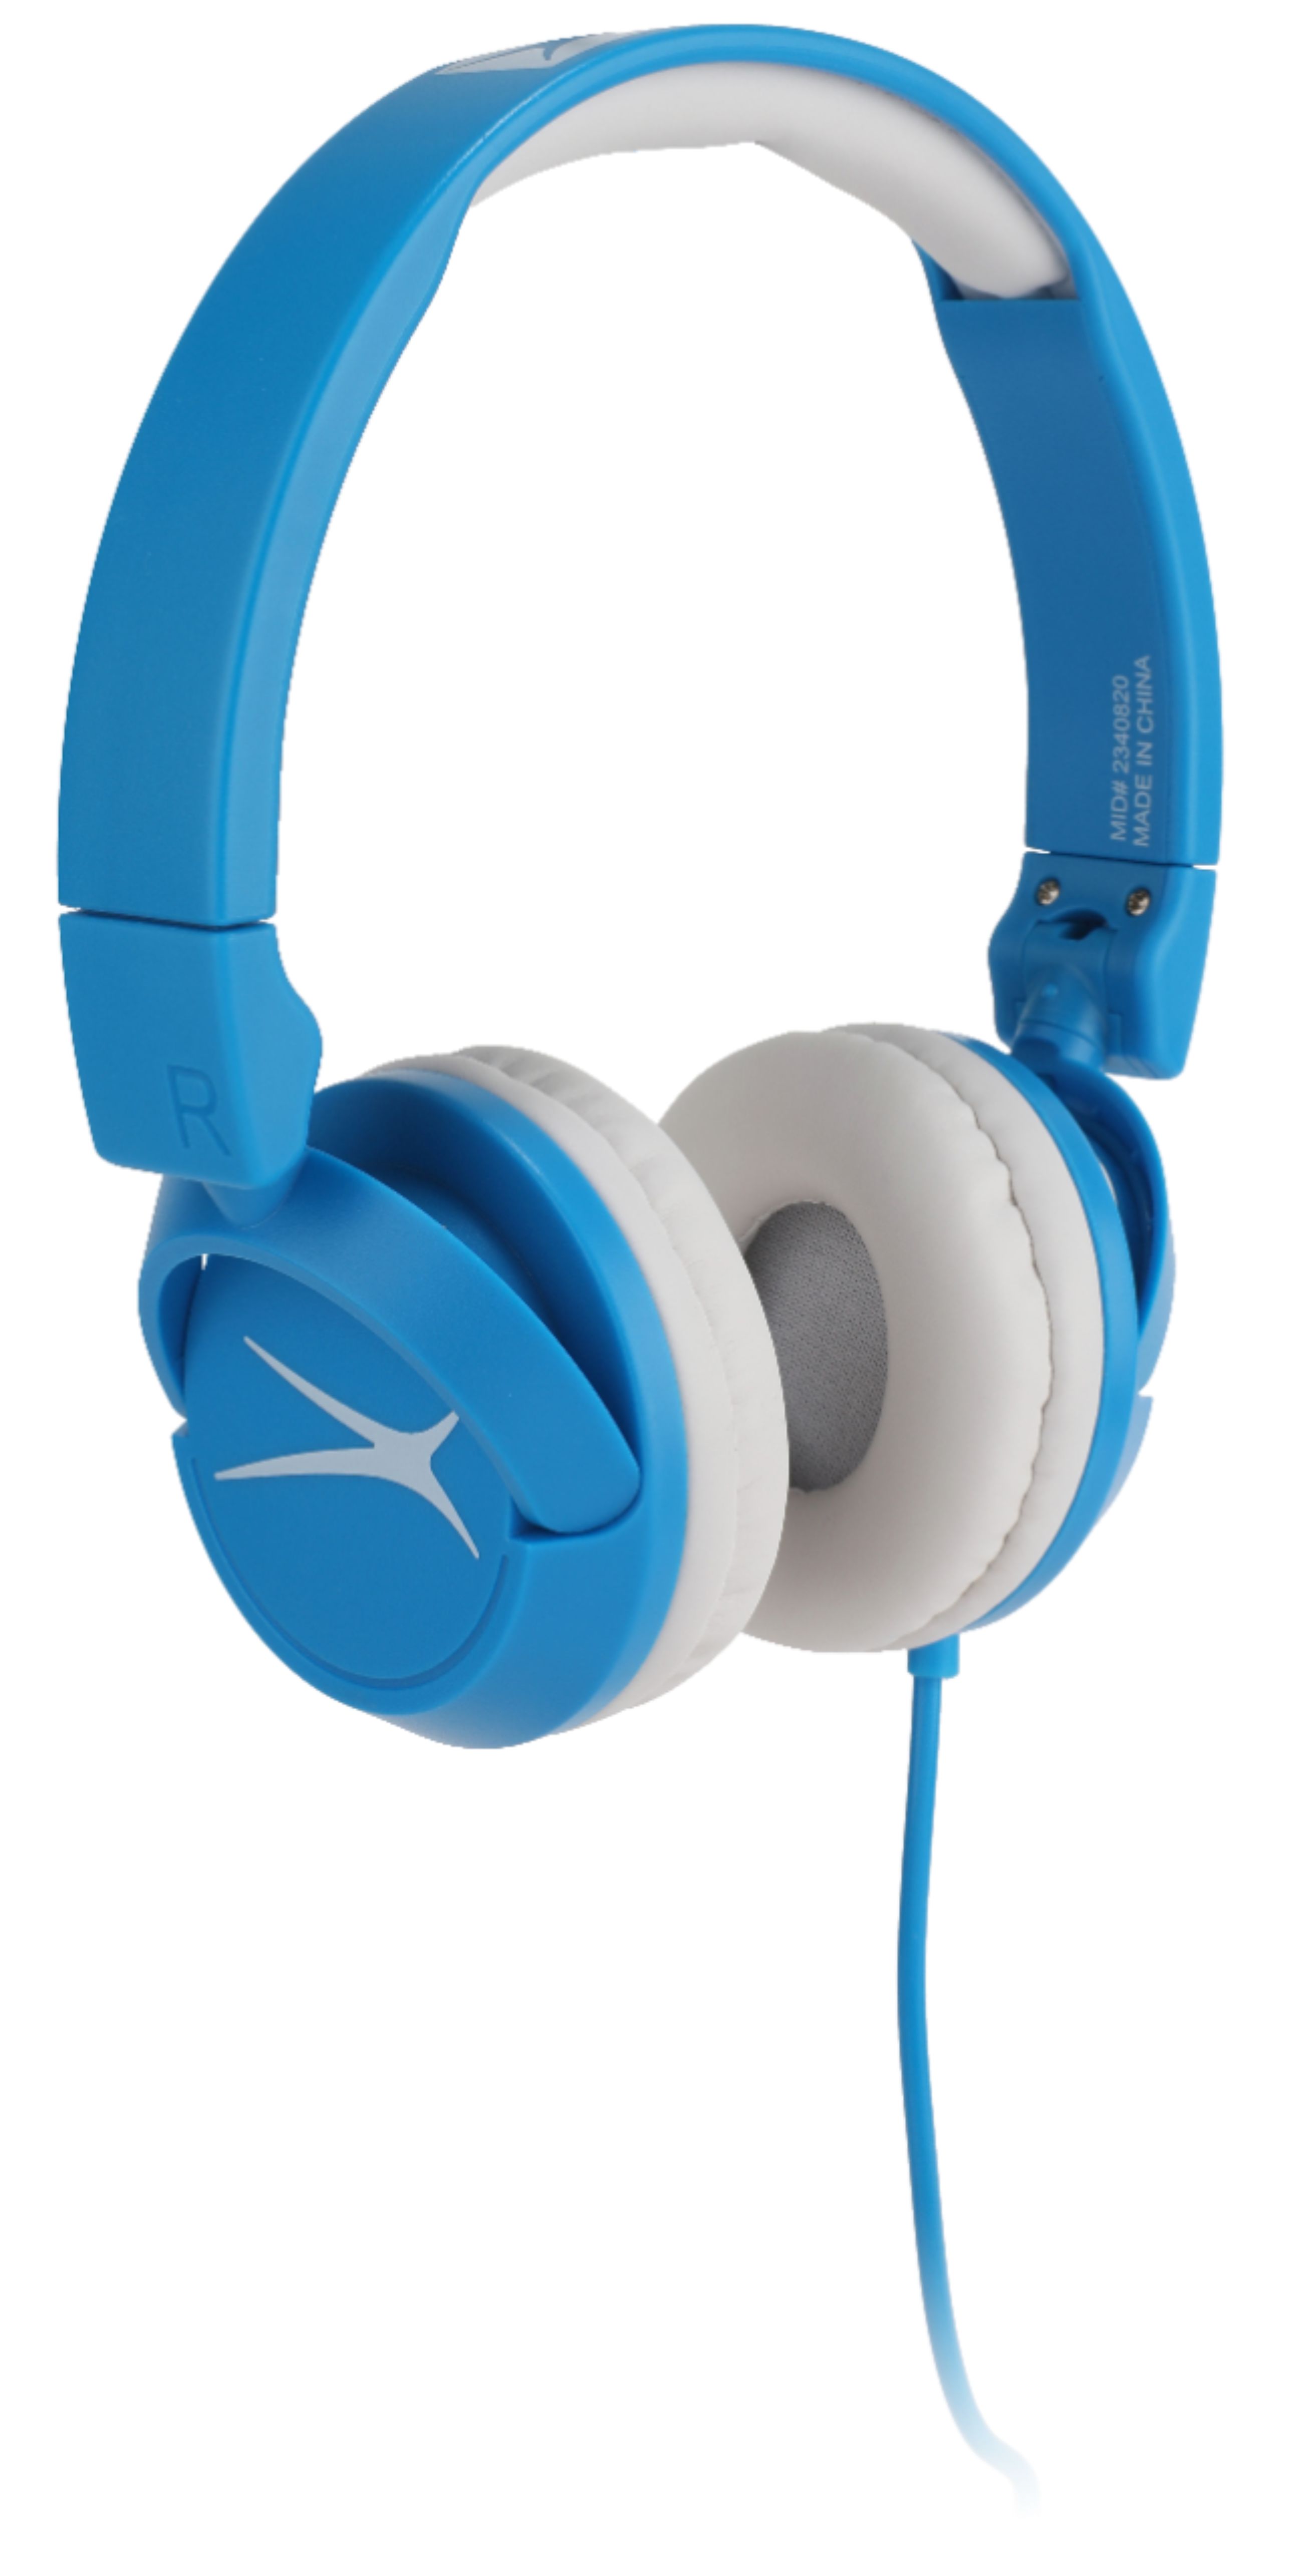 Angle View: Altec Lansing - Kid Safe Wired On-Ear  Headphones - Blue